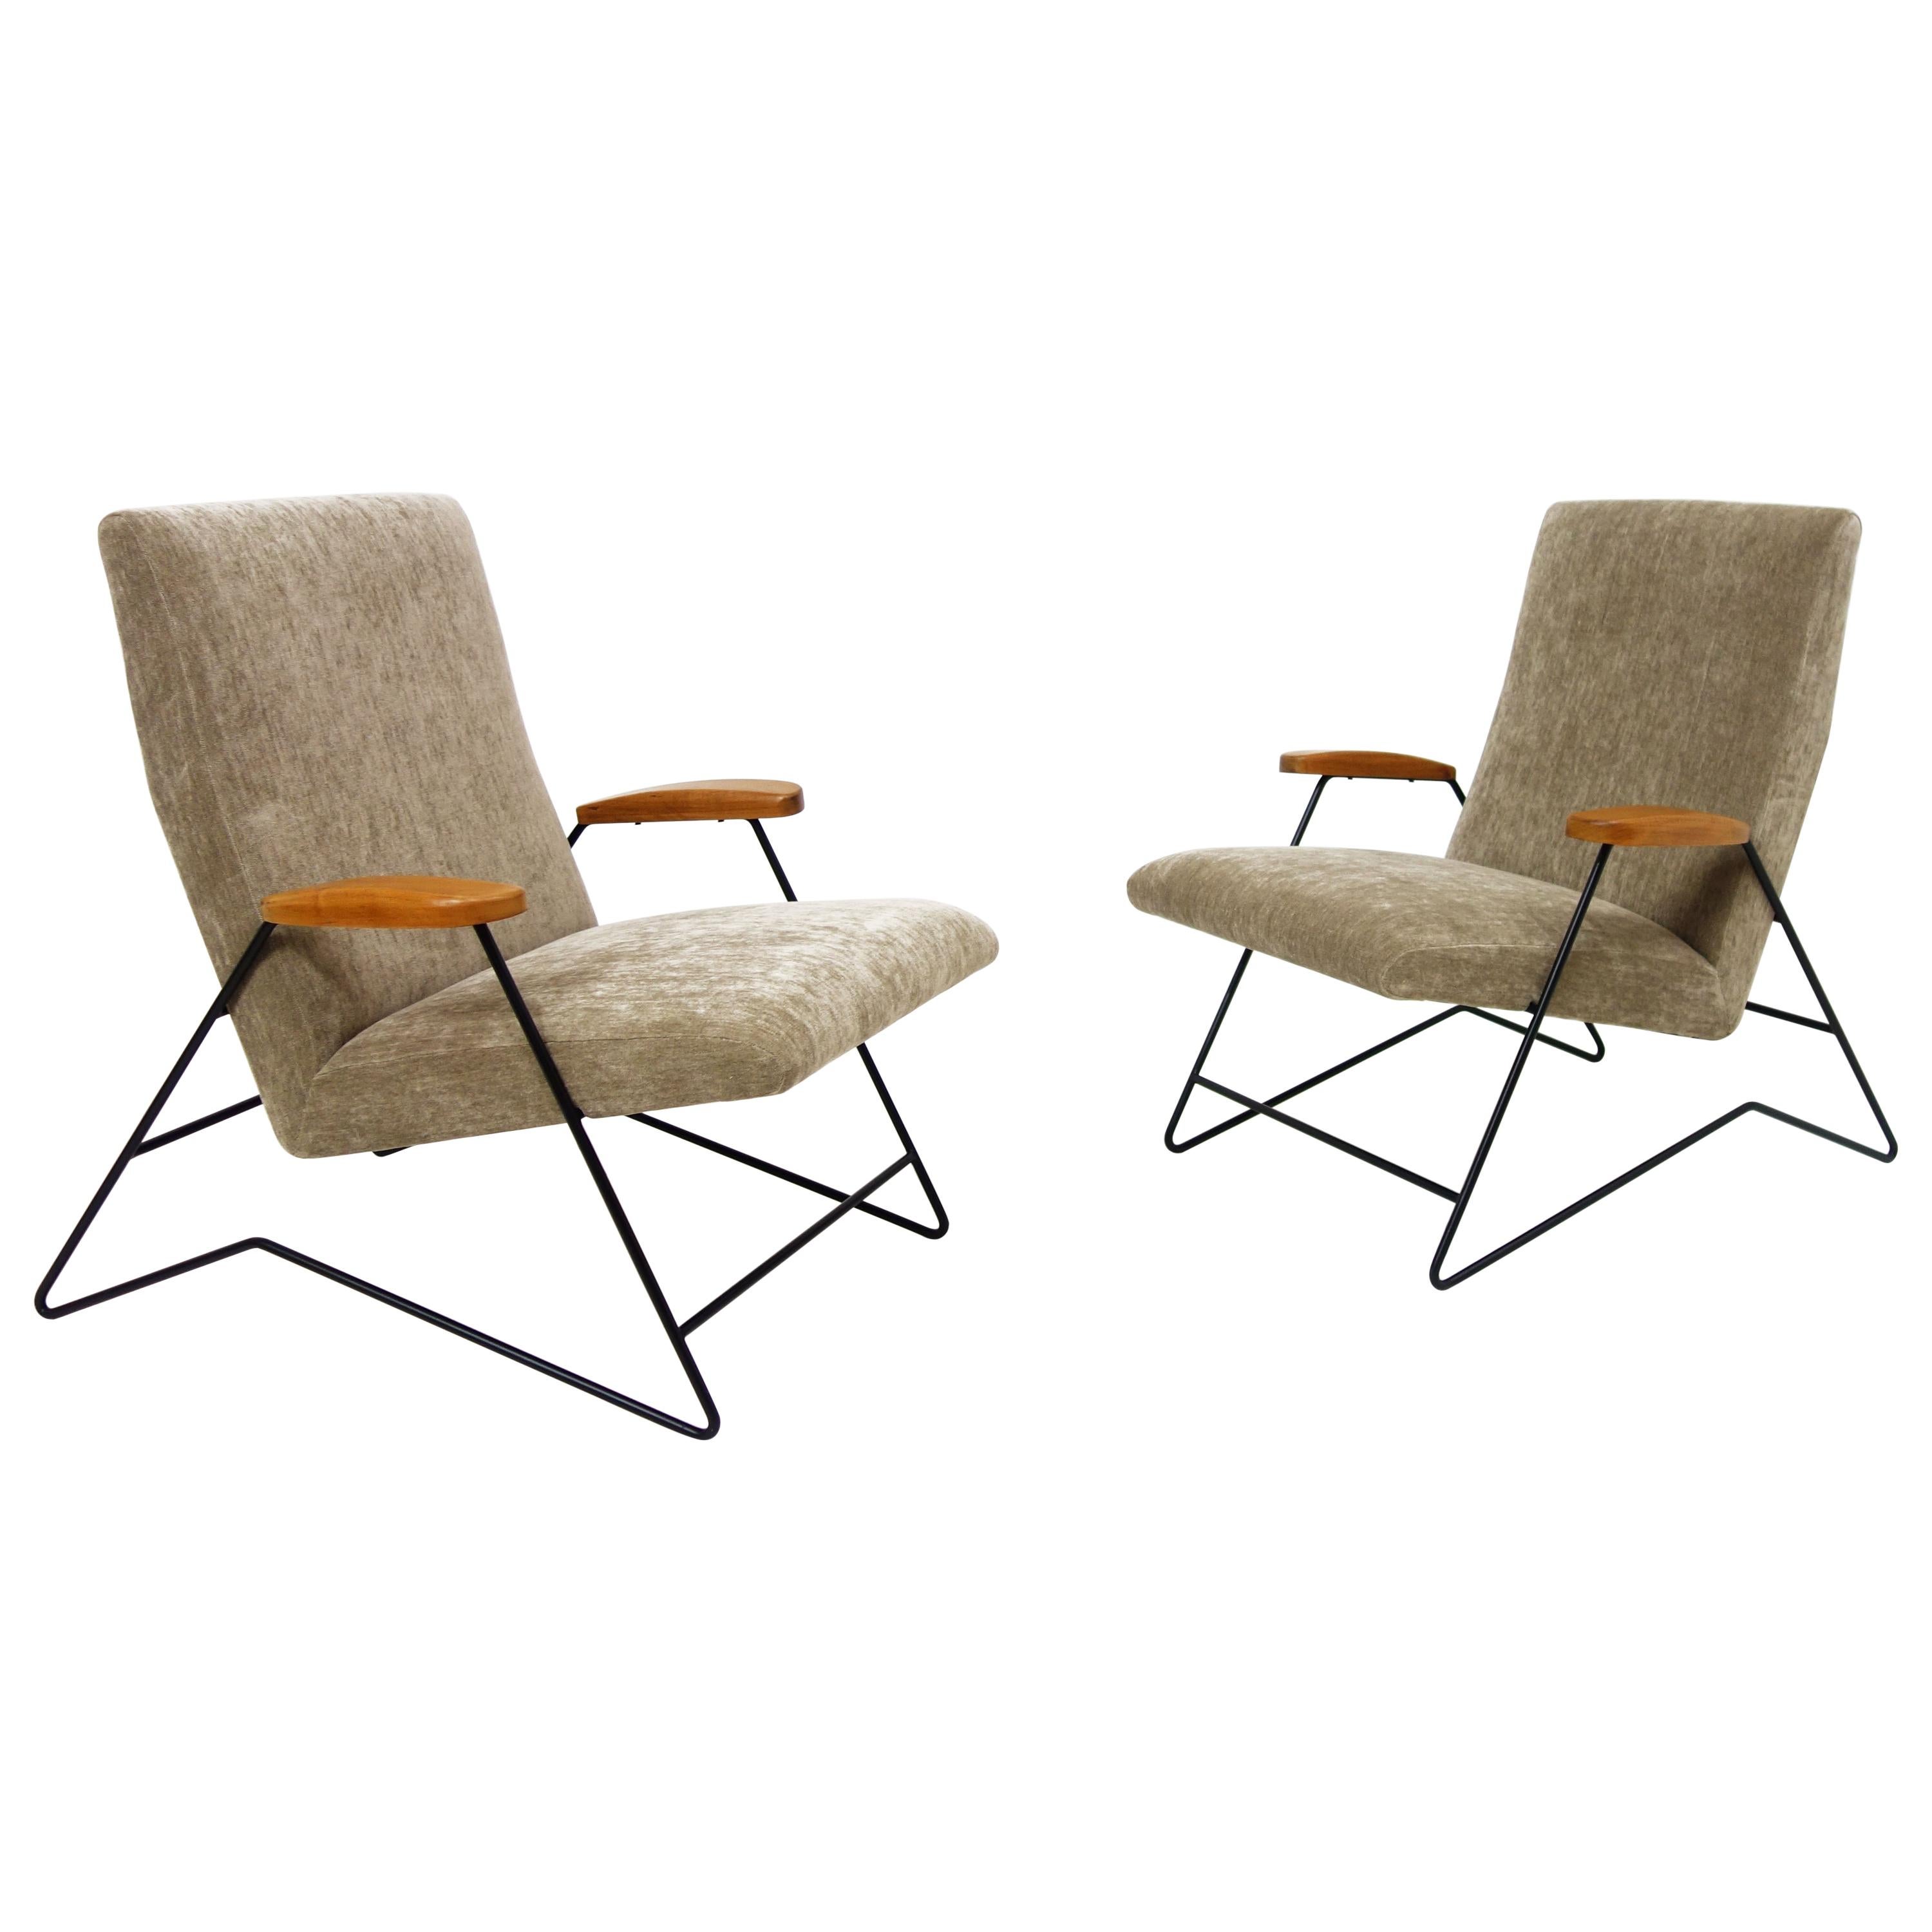 Pair of Armchairs by Carlo Hauner and Martin Eisler, Forma Edition, circa 1955